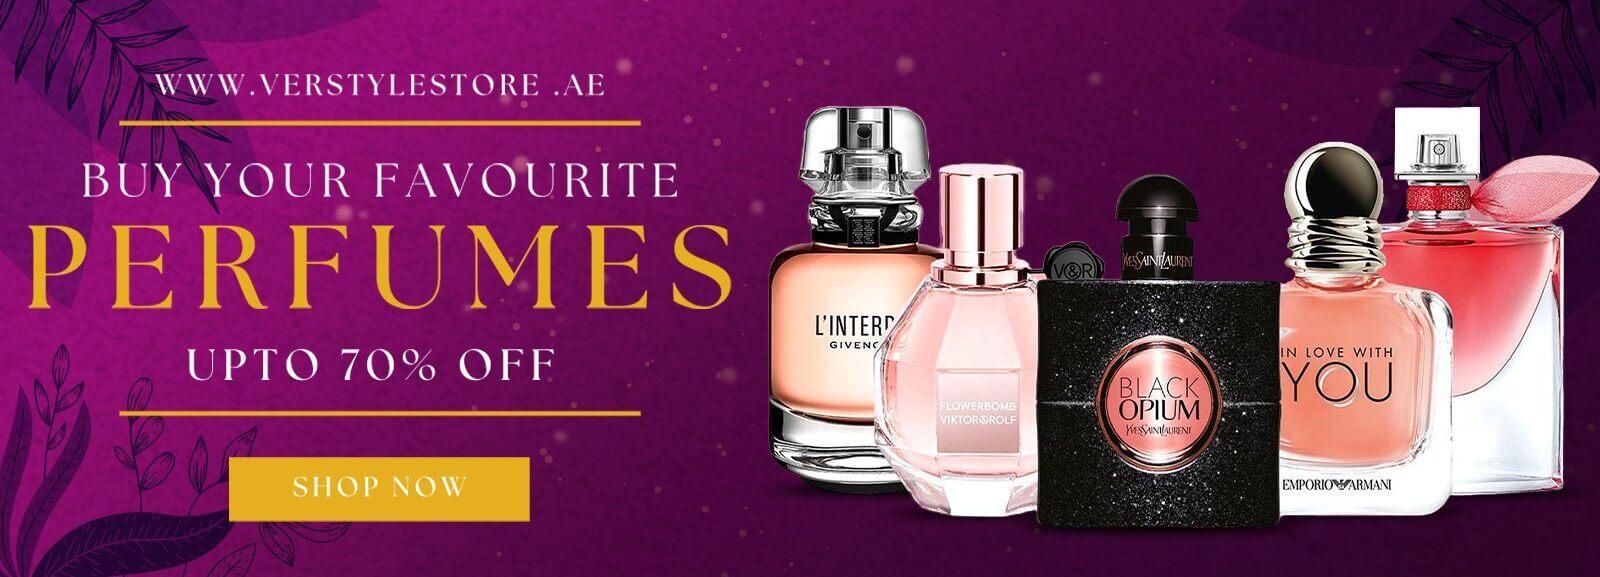 Buy Your Favourite Perfumes